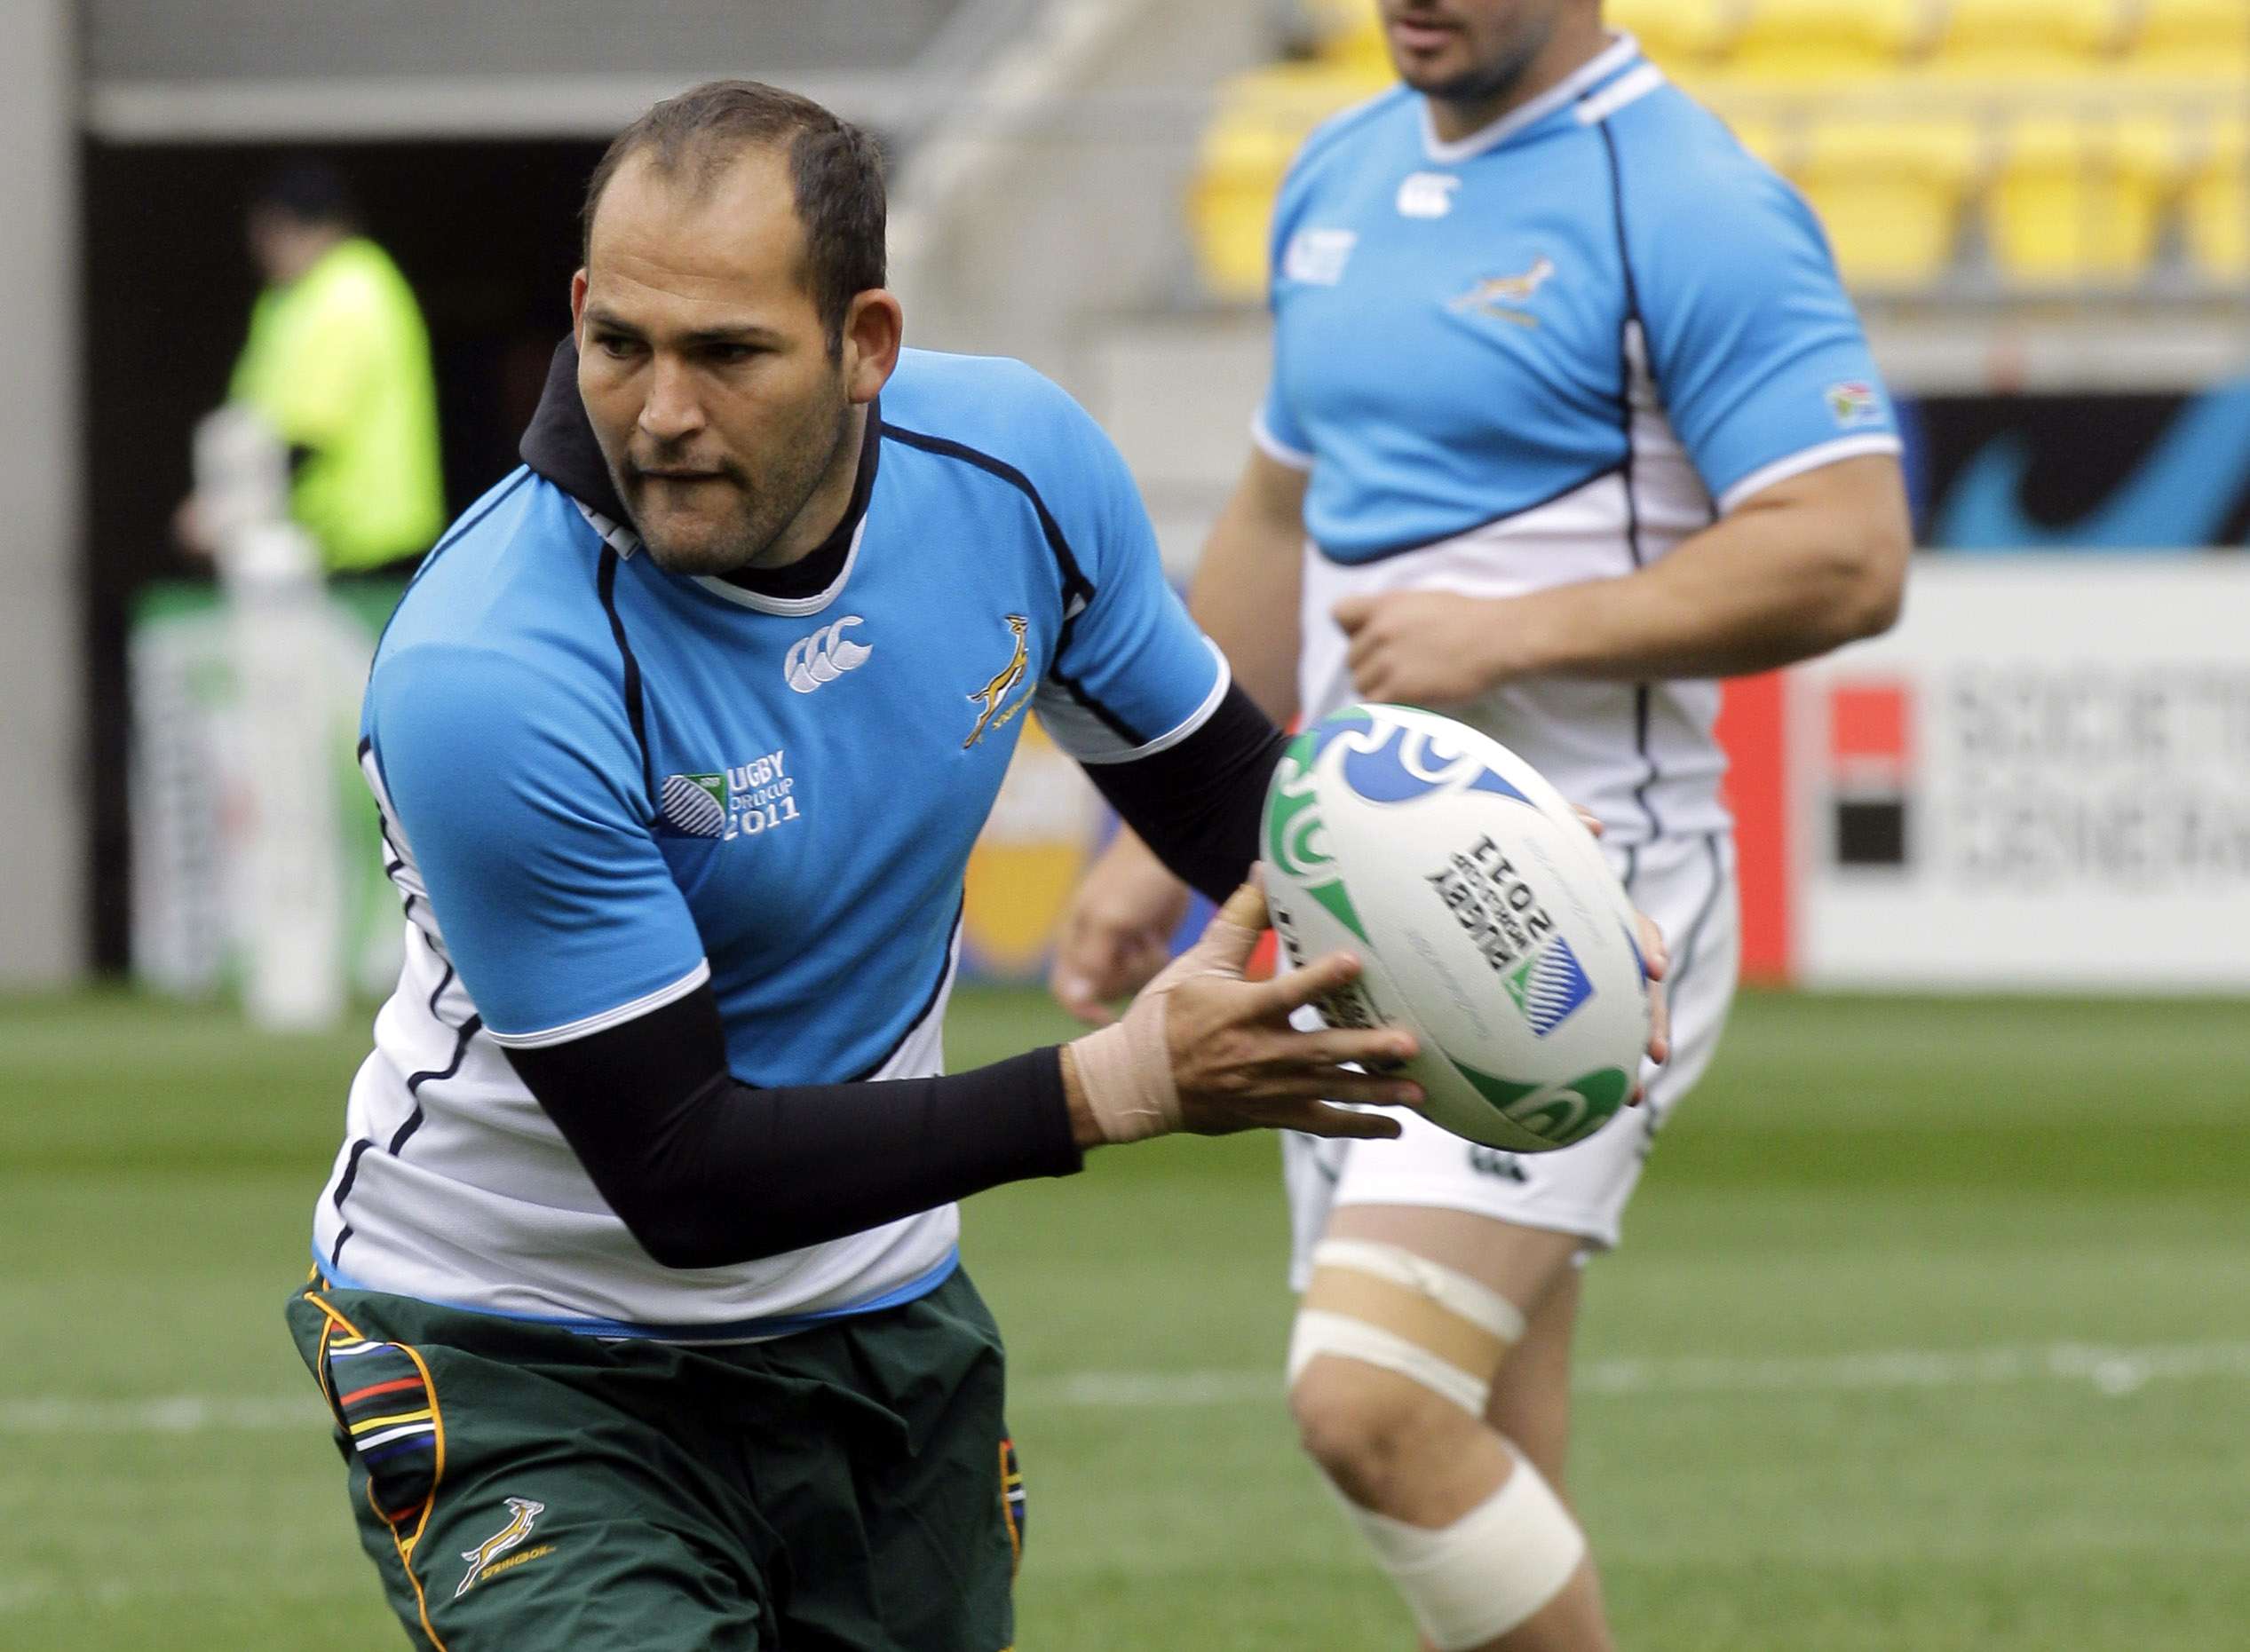 South Africa’s Fourie du Preez says it is time to hang up his boots after 15 years. Photo: AP